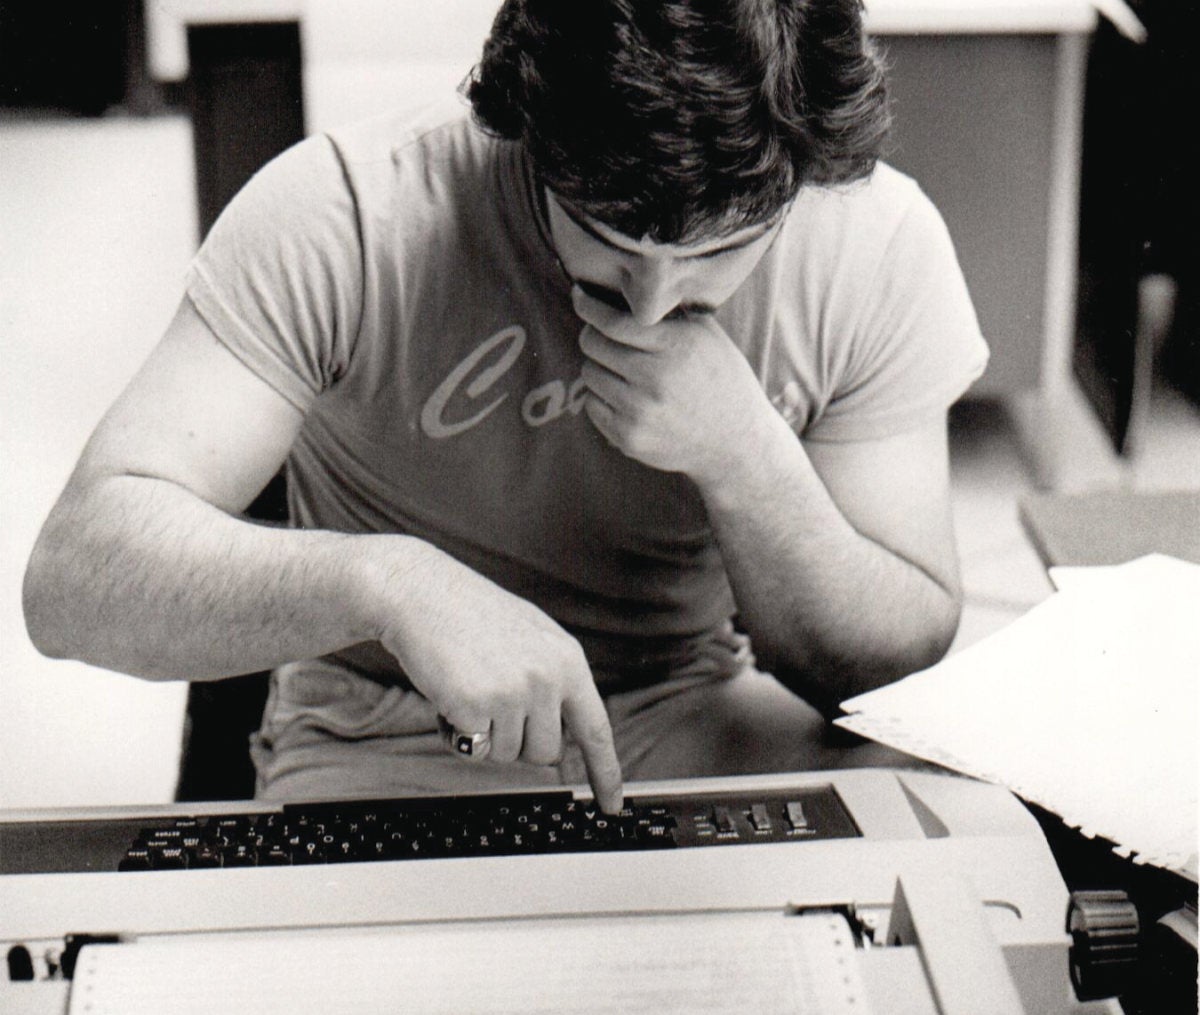 A student bends over a vintage word processor